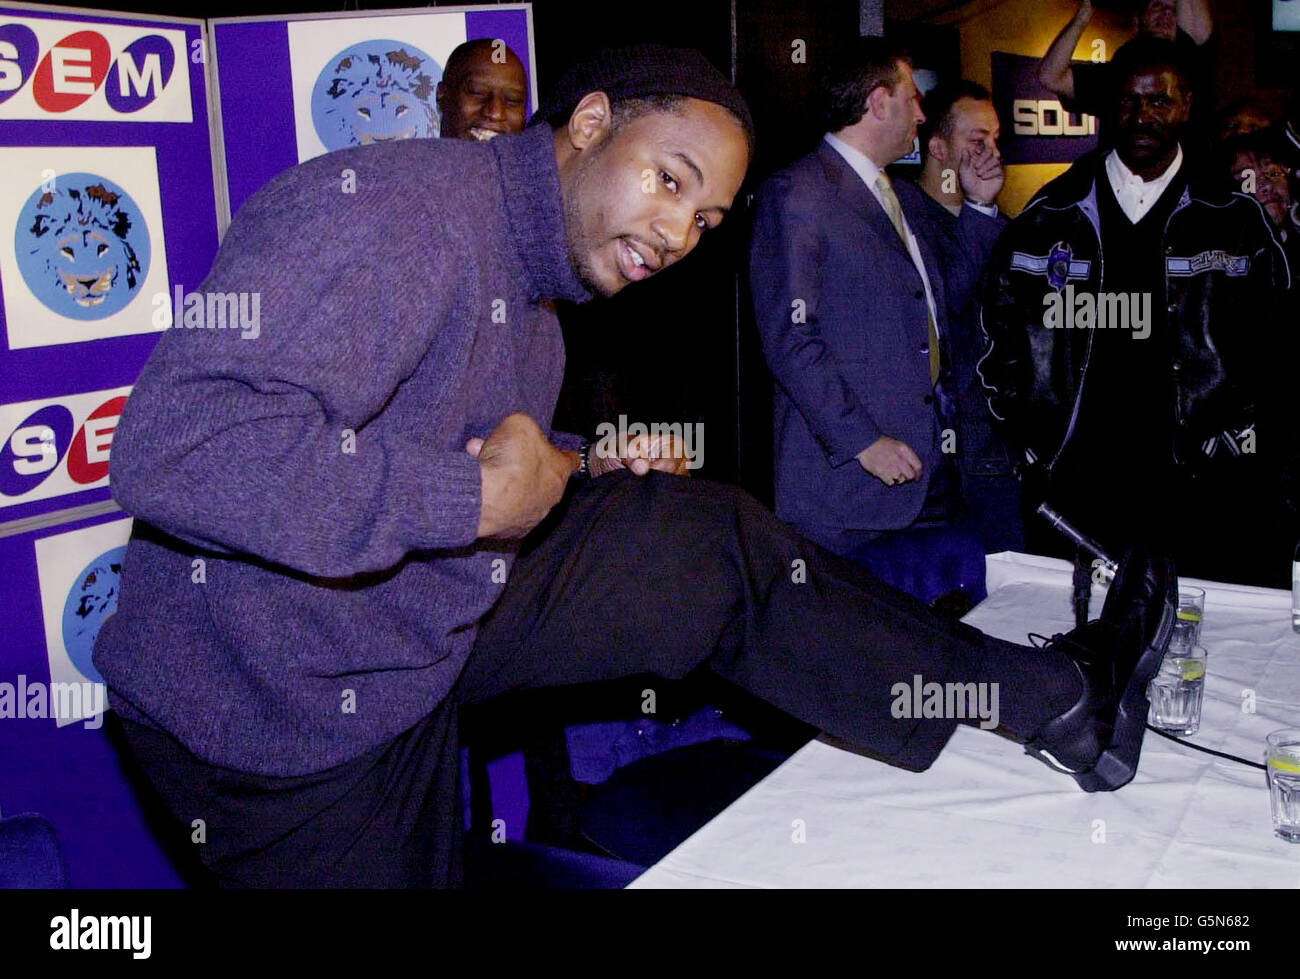 Britain's World Heavyweight Boxing Champion, Lennox Lewis shows the press the leg that he claims was bitten by Mike Tyson, at a press conference in central London. * The conference was called after the hearing in Nevada USA, which stopped the planned Lewis v Mike Tyson title fight from going ahead in Las Vegas. Lewis admitted he was considering suing Mike Tyson after revealing the controversial American bit out 'a significant piece of flesh during their press conference brawl in New York.' Stock Photo